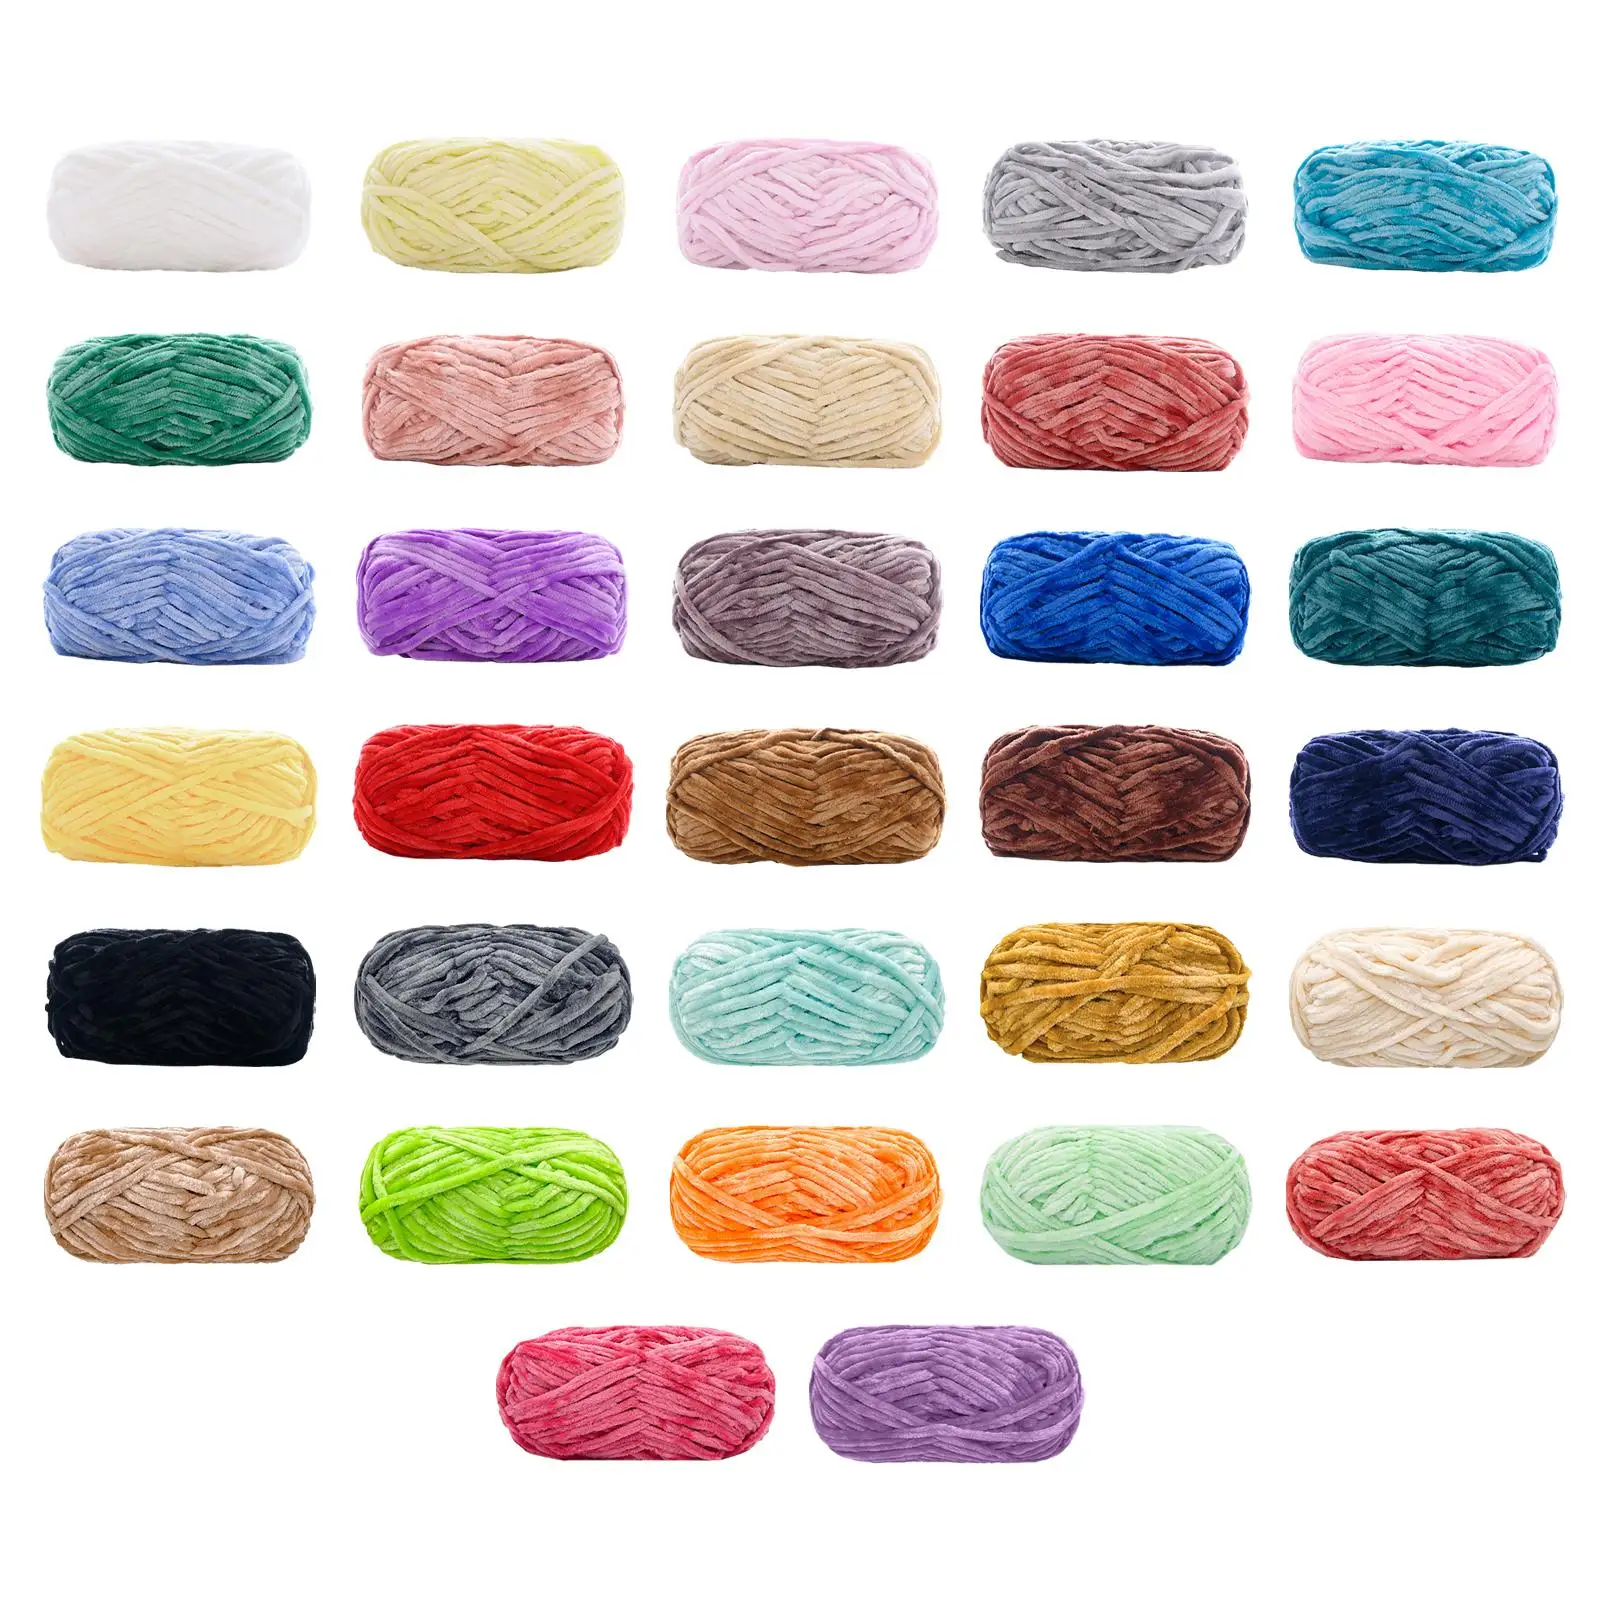 Thick Chunky Yarn Super Bulky Giant Wool Yarn Tube Giant Yarn Hand Knitting Bulky Yarn for Craft Pillow Sweaters Weaving Pet Bed